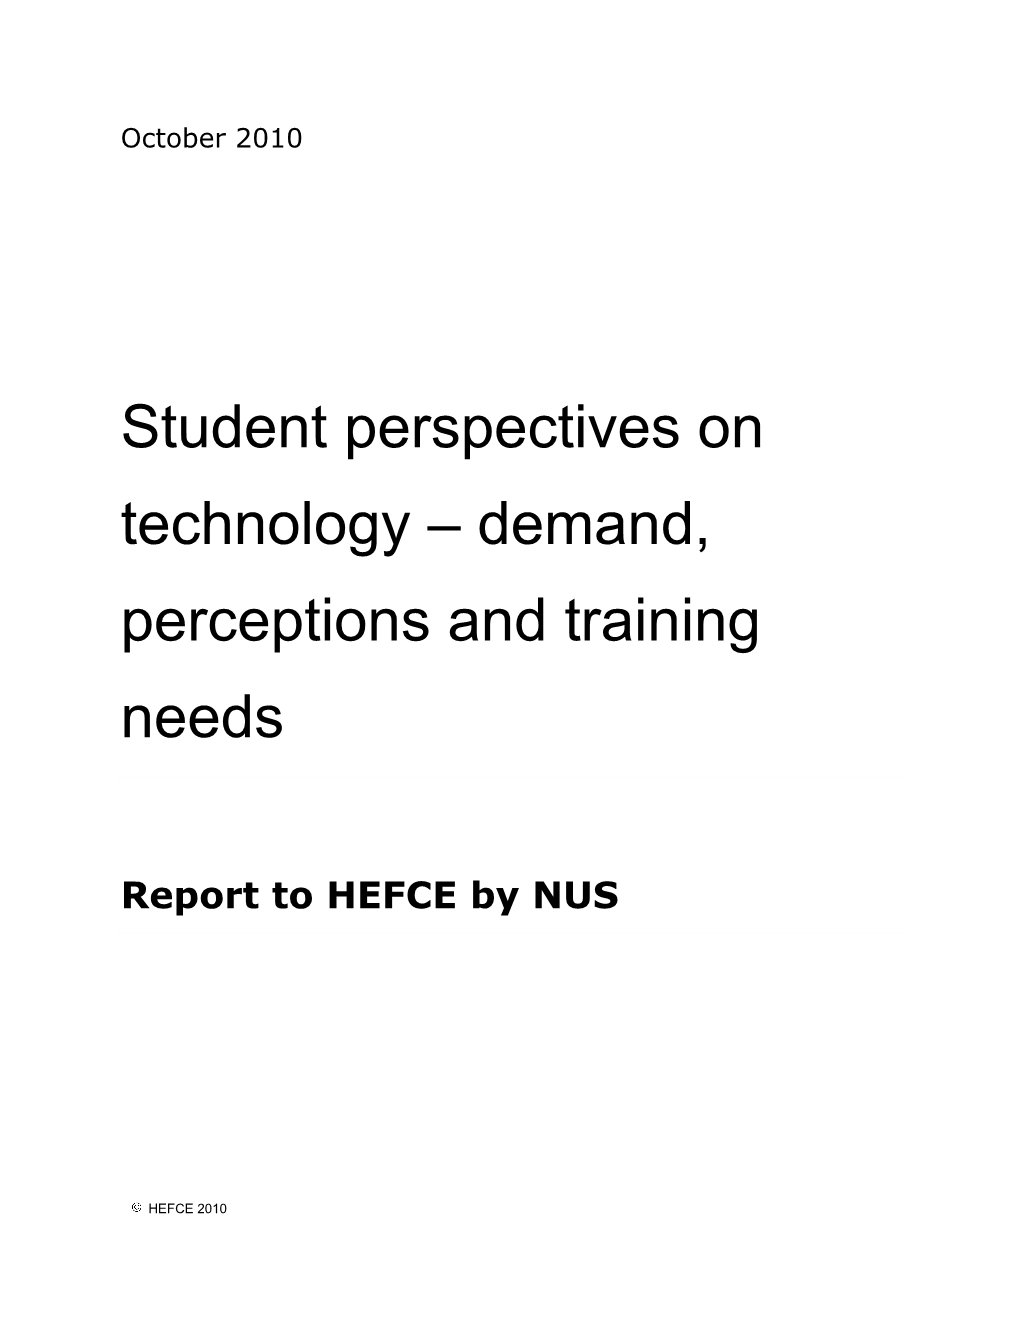 Student Perspectives on Technology – Demand, Perceptions and Training Needs